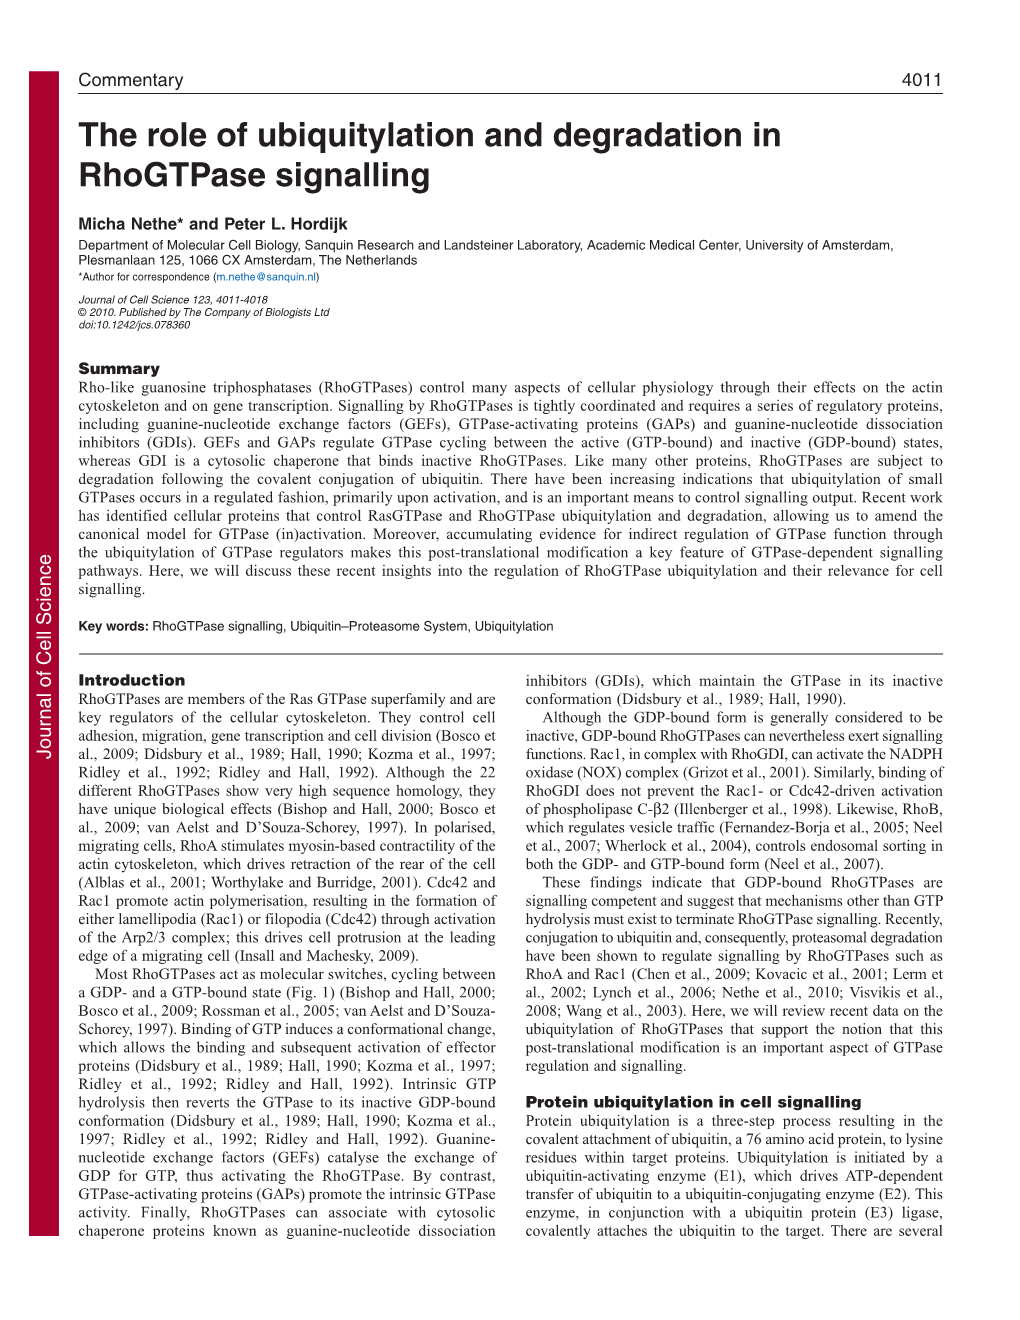 The Role of Ubiquitylation and Degradation in Rhogtpase Signalling